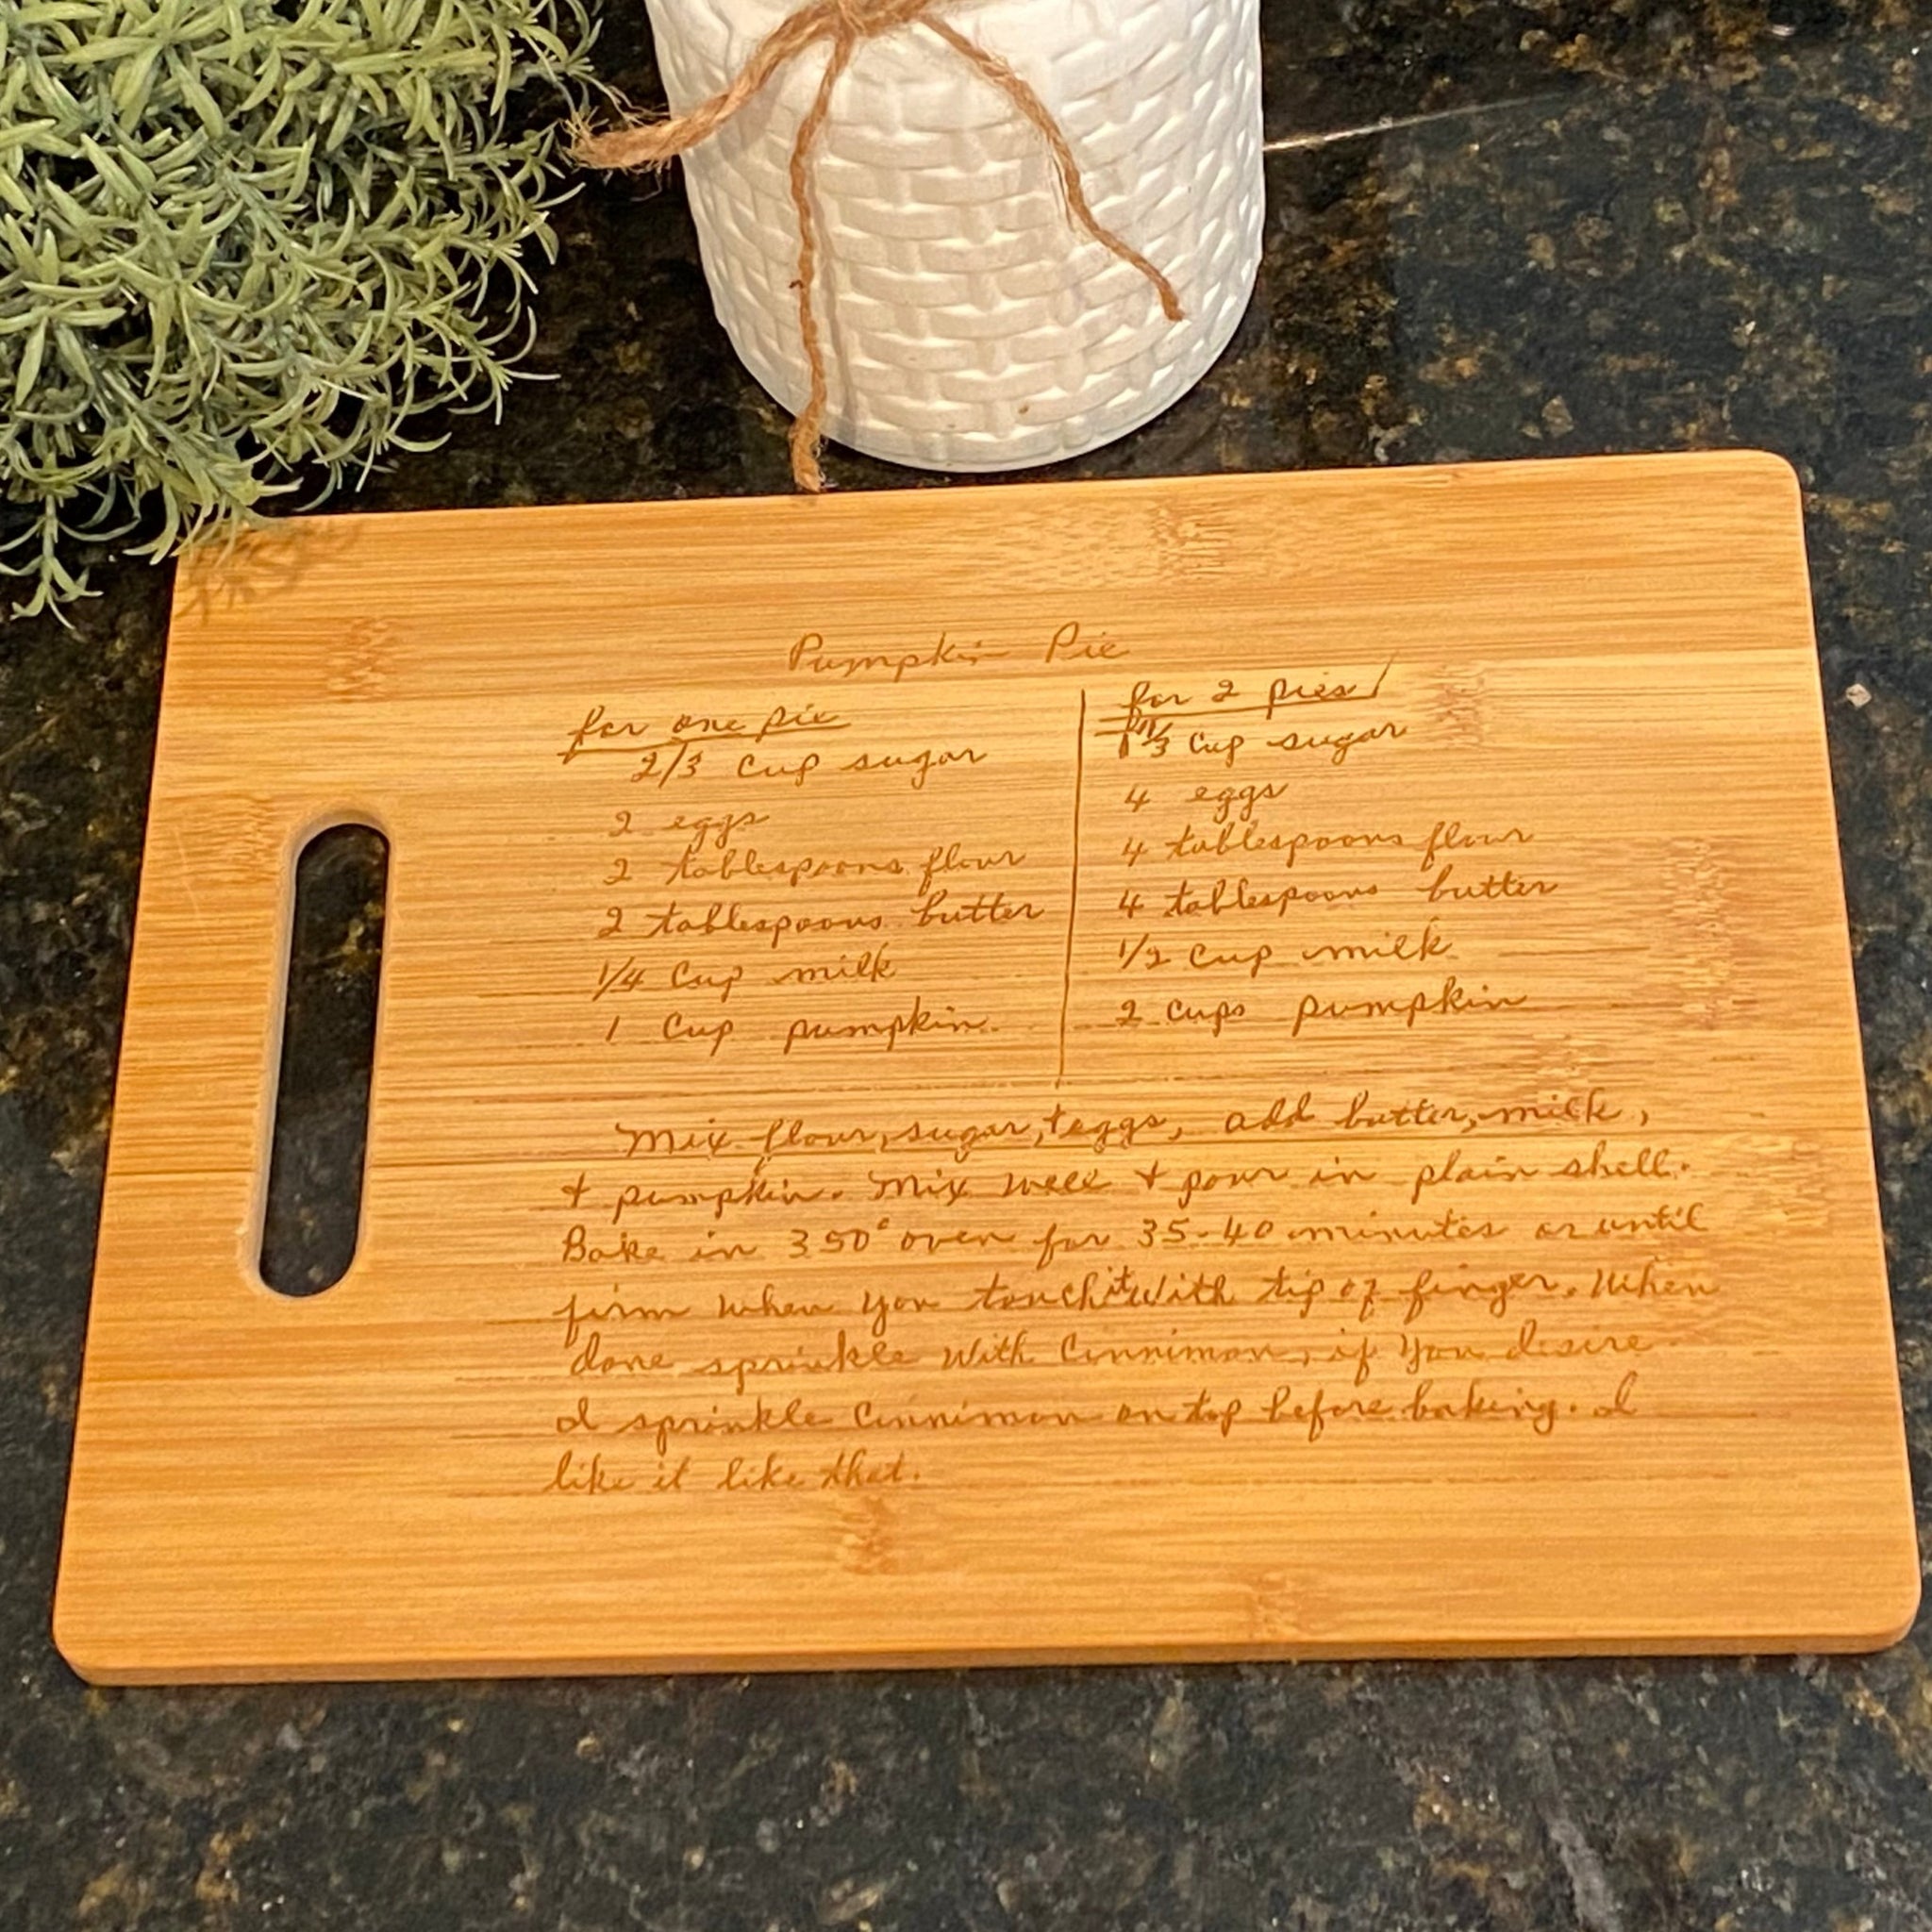 Master Chef Personalized Cutting Board - Engraved, EG4023